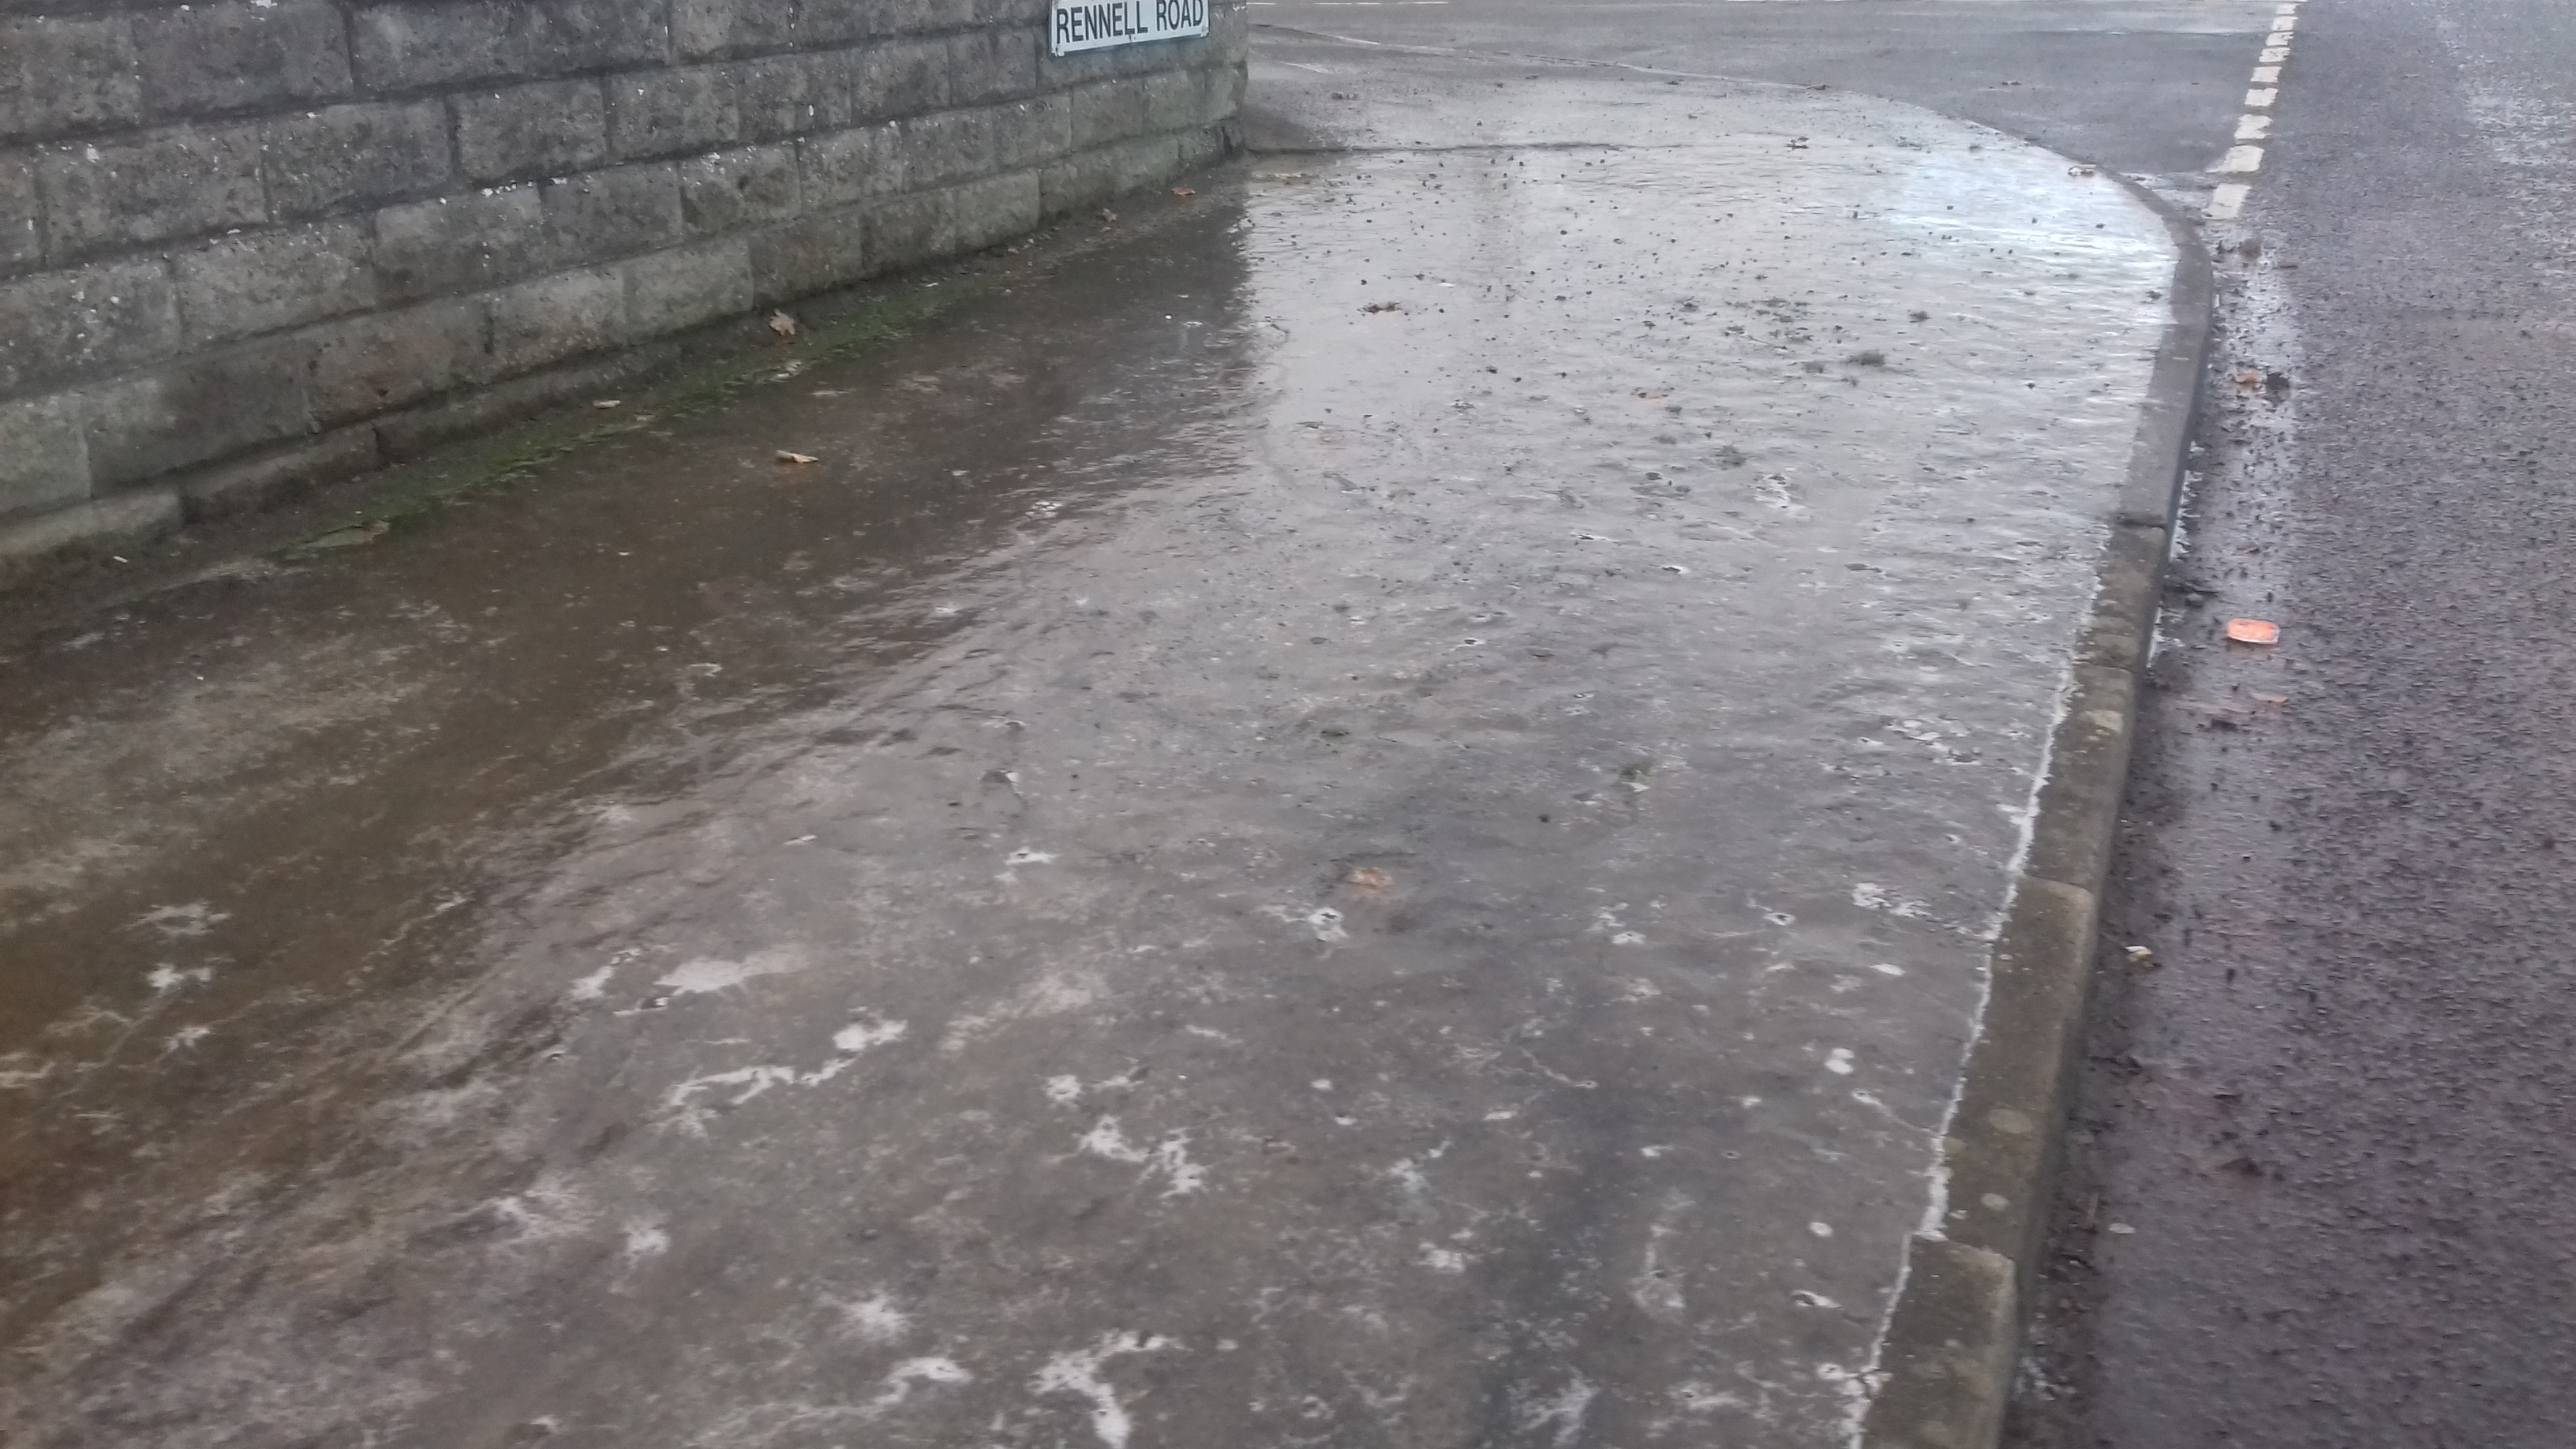 An individual was paid £120,000 compensation after slipping on an "icy surface" in Dundee